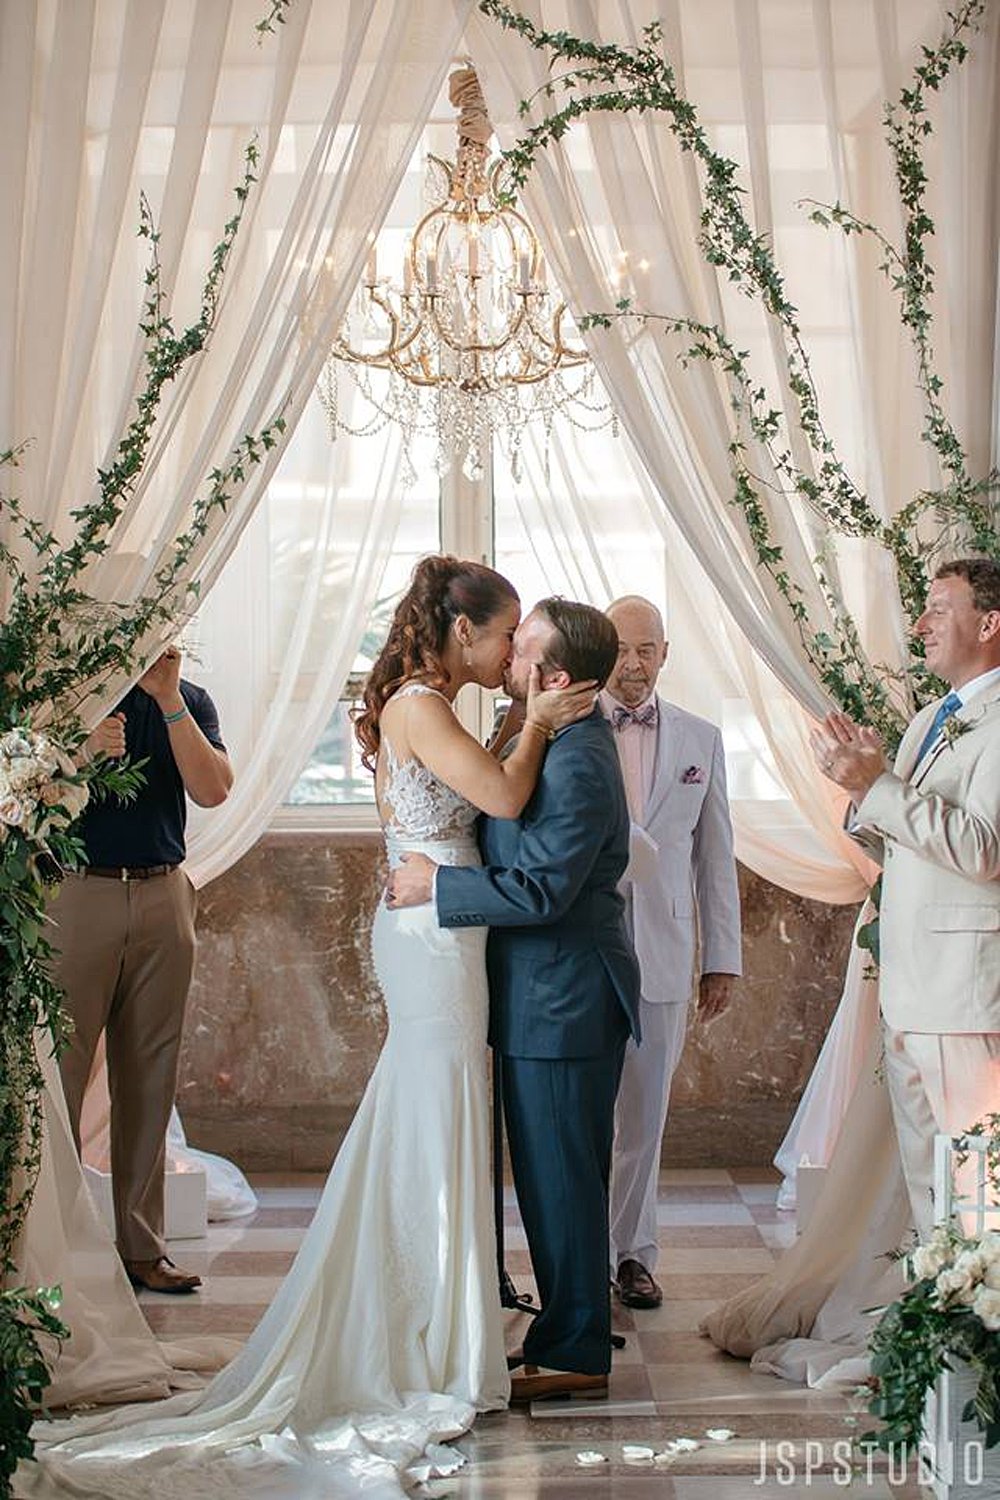 Bride and Groom Kissing at the Alter after being pronounced man and wife | Vintage Garden Wedding at the Historic Alfred I DuPont Building in Miami, FL